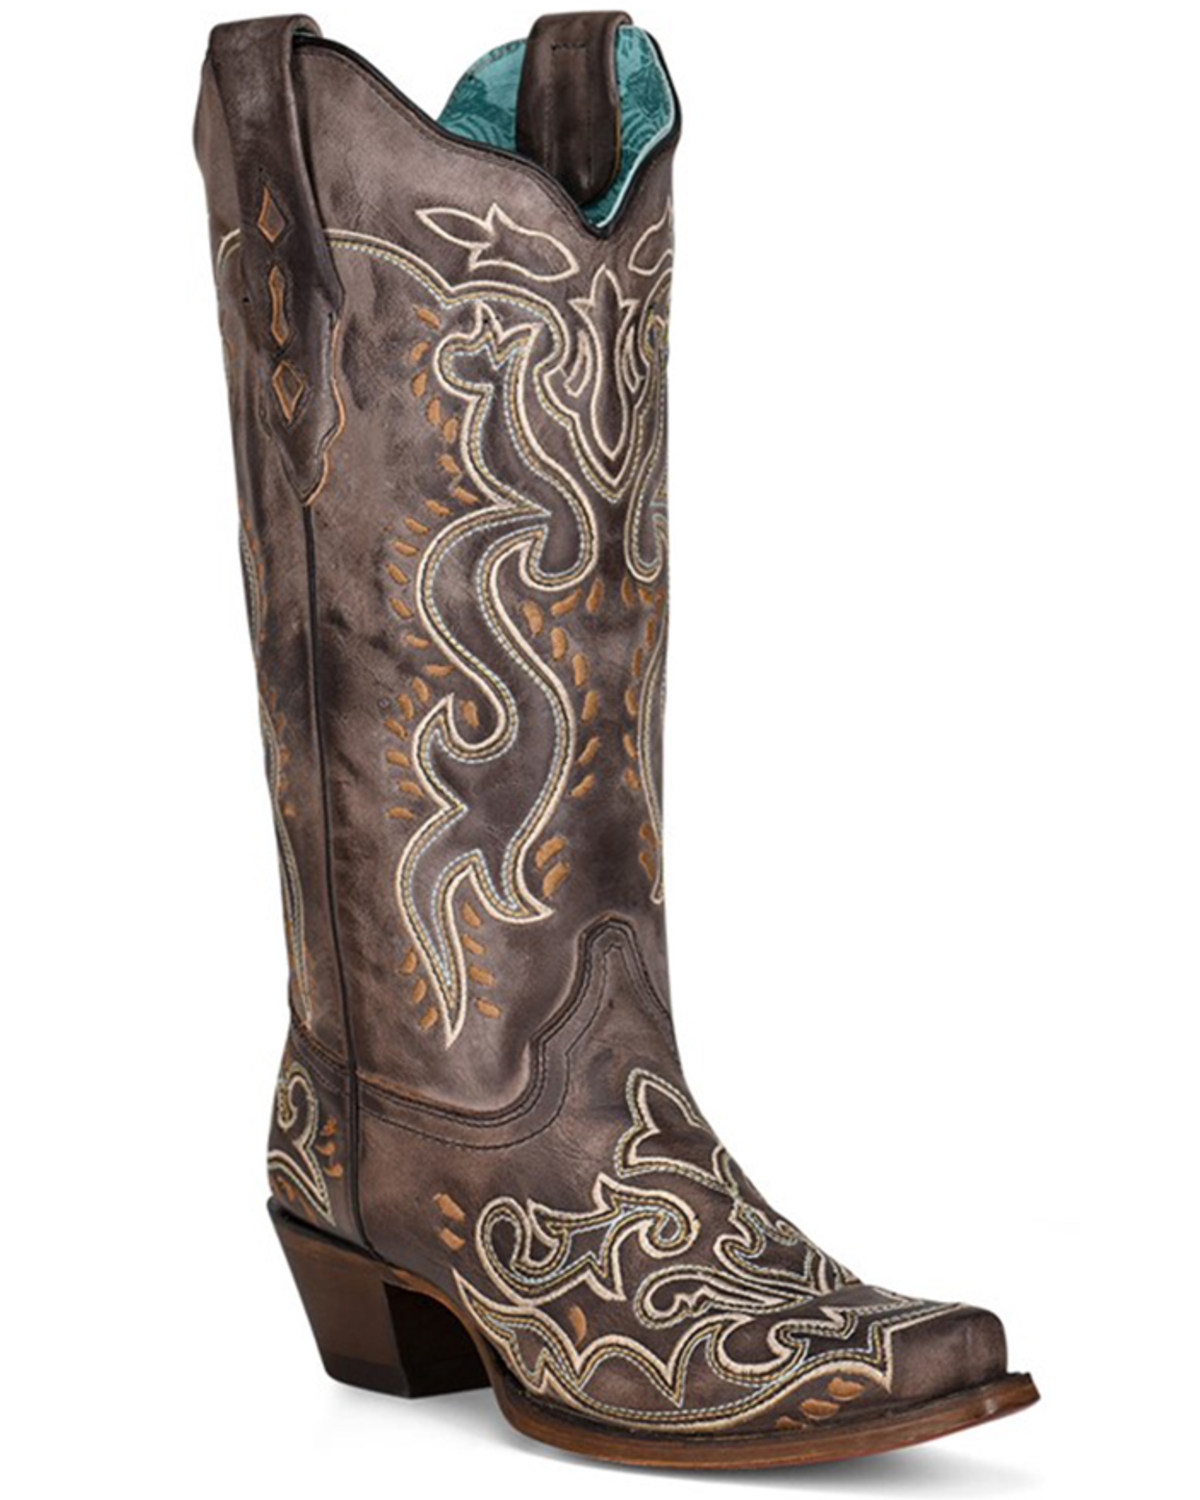 Corral Women's Brown Embroidery Western Boots - Snip Toe